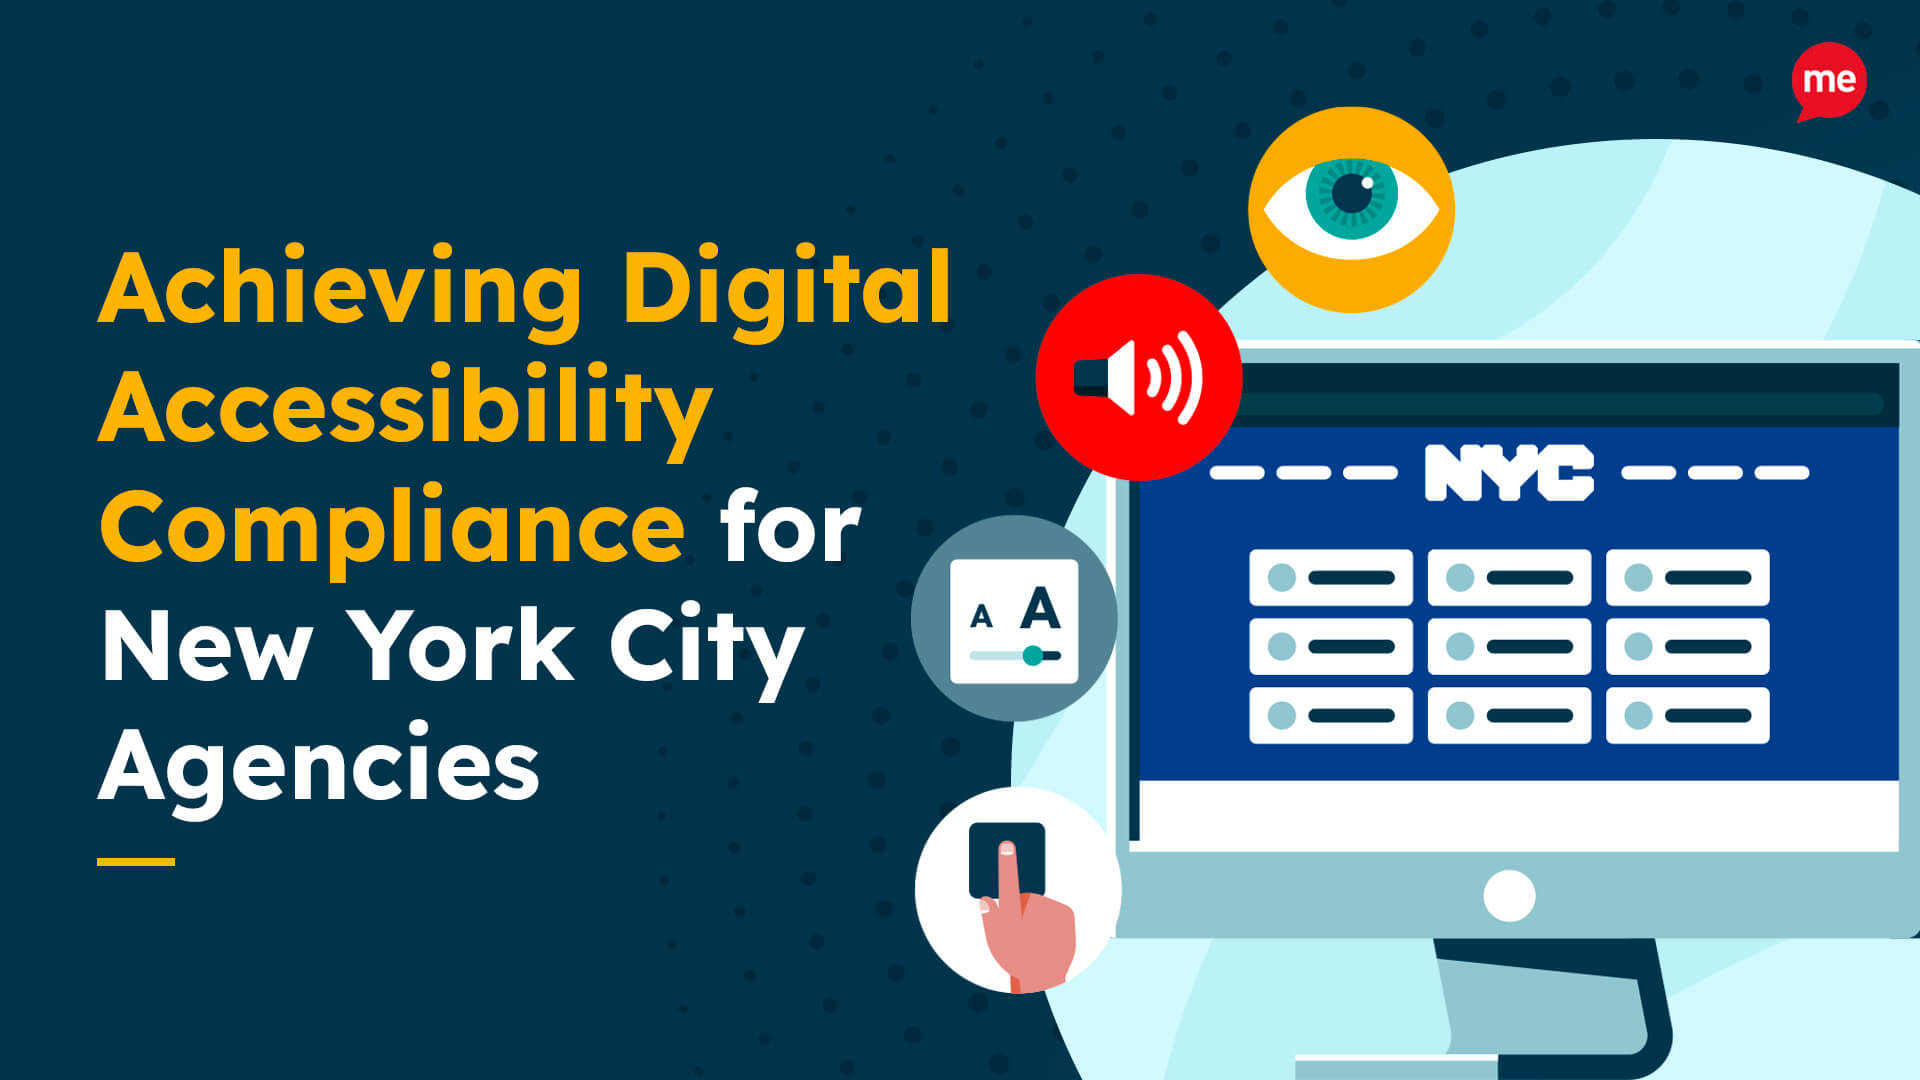 Achieving Digital Accessibility Compliance for New York City Agencies